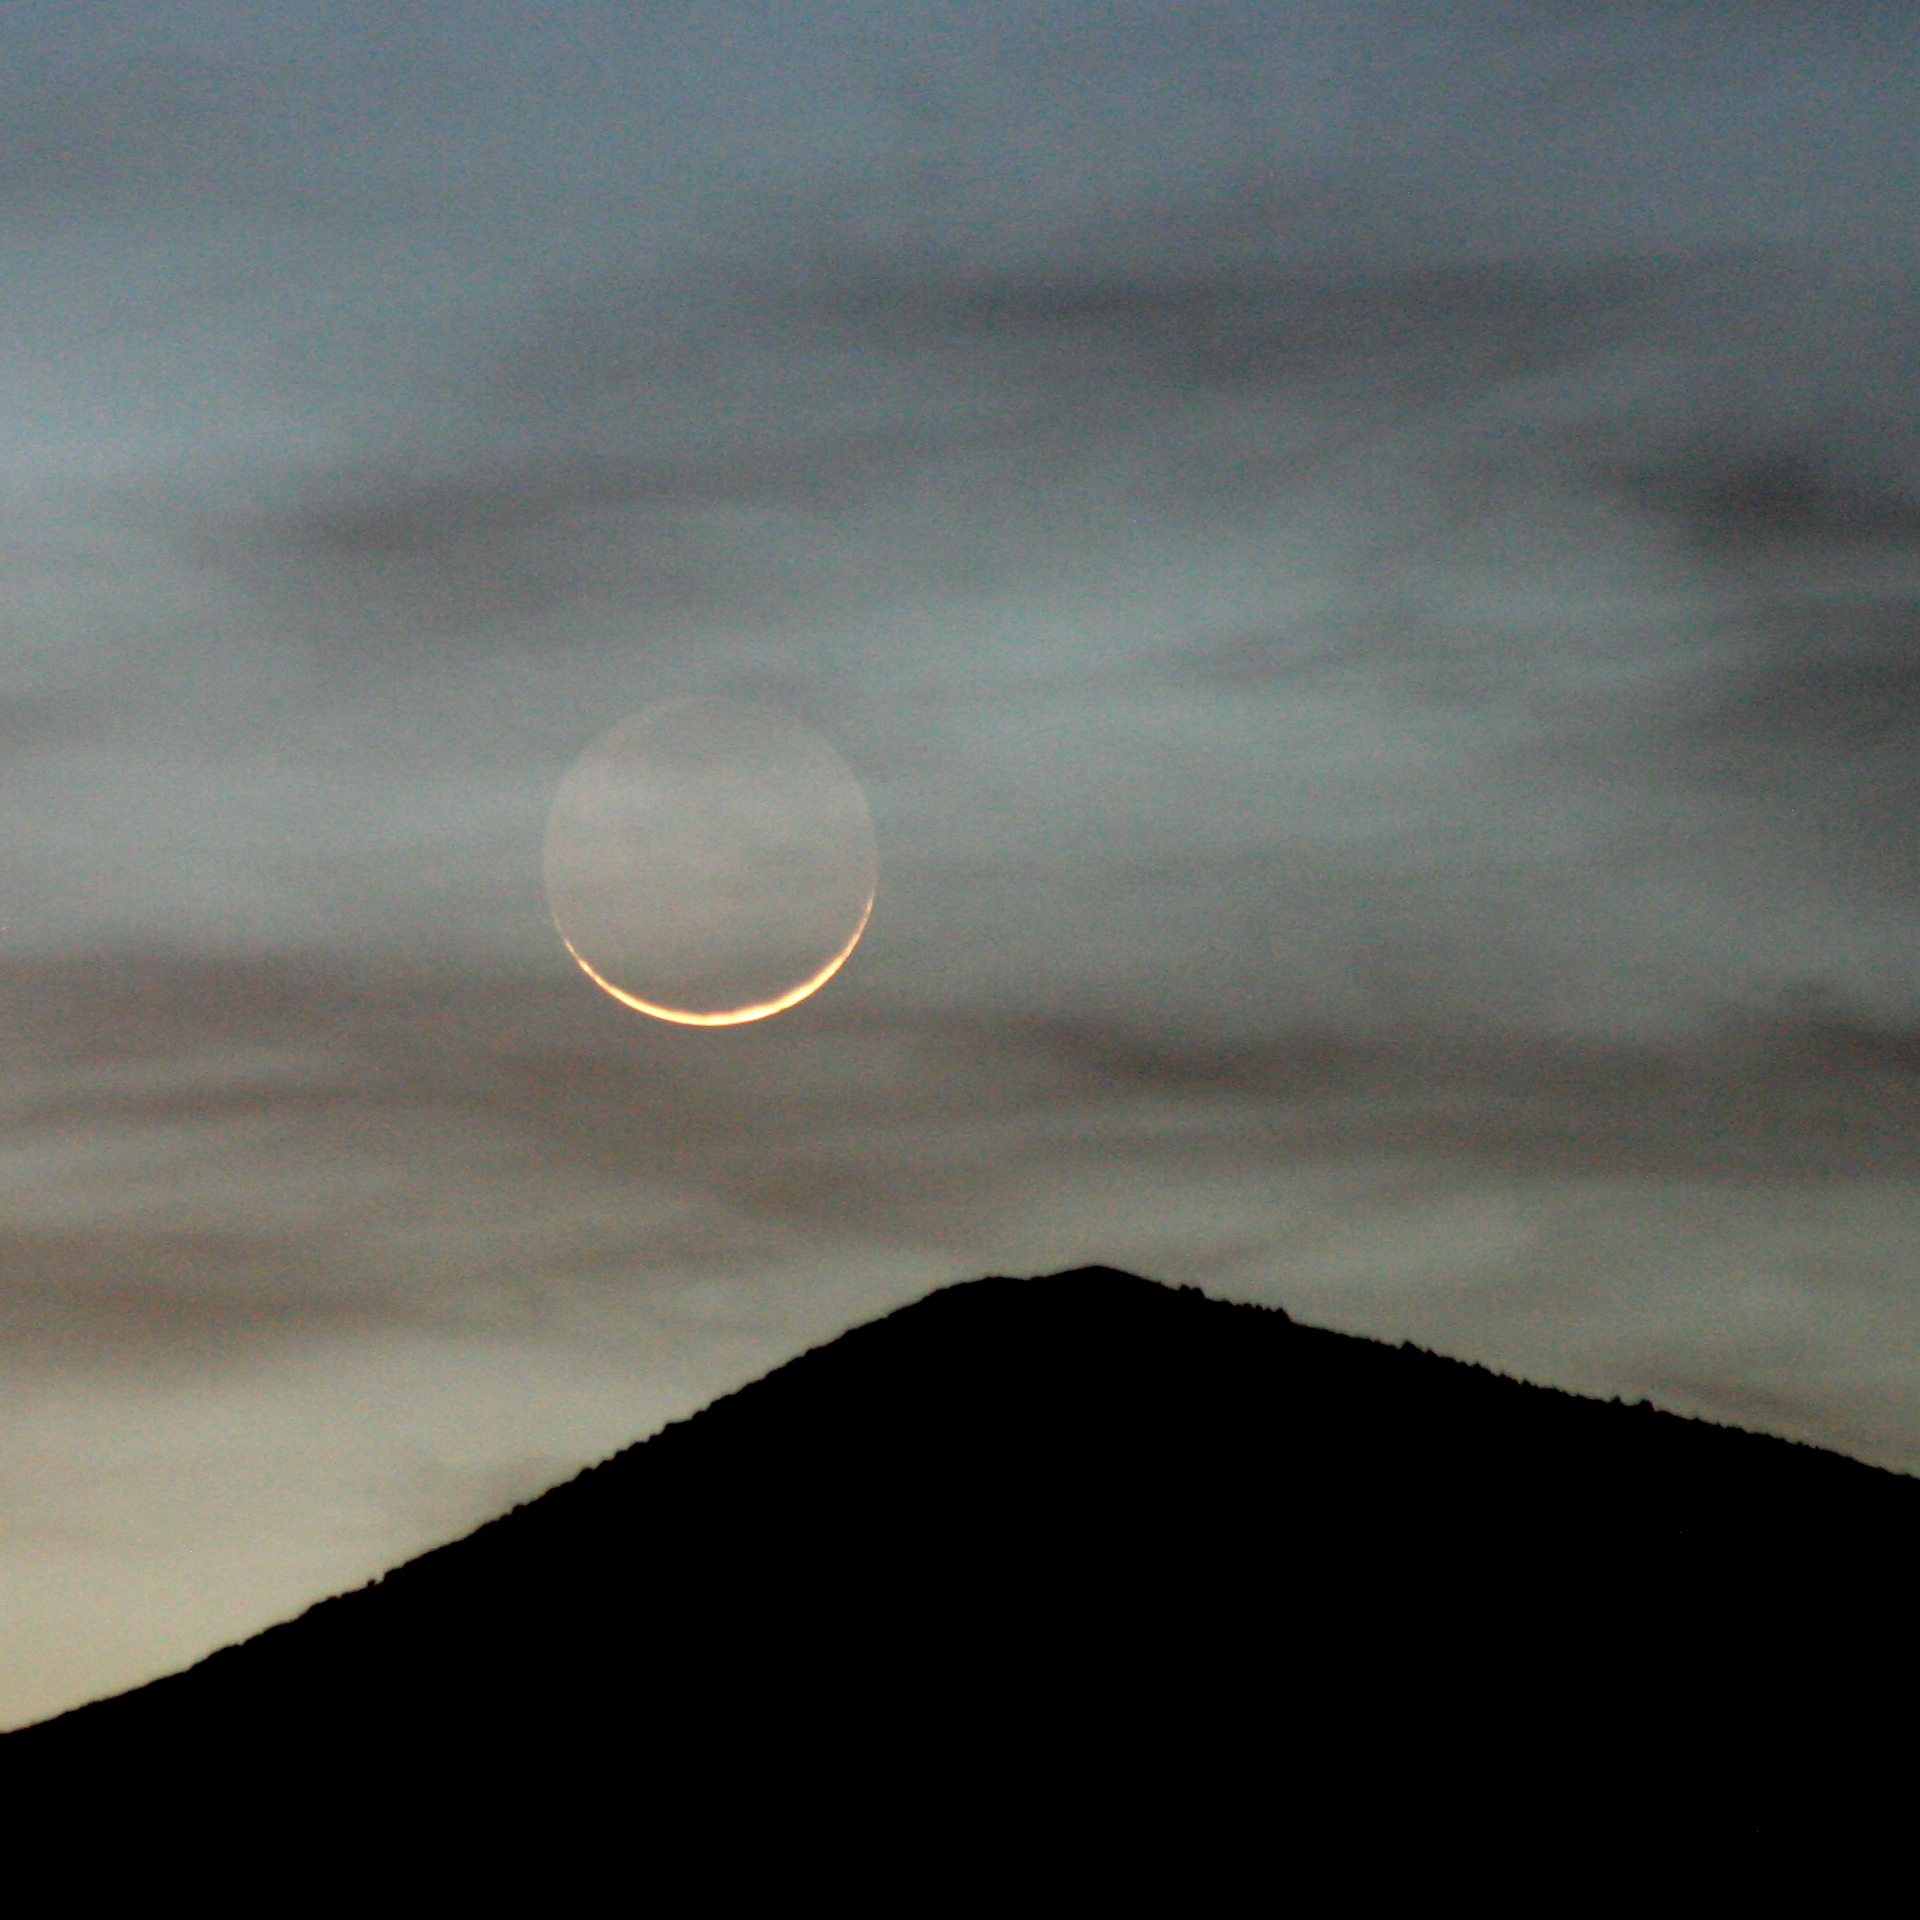 Moon and thin clouds above a single mountain summit